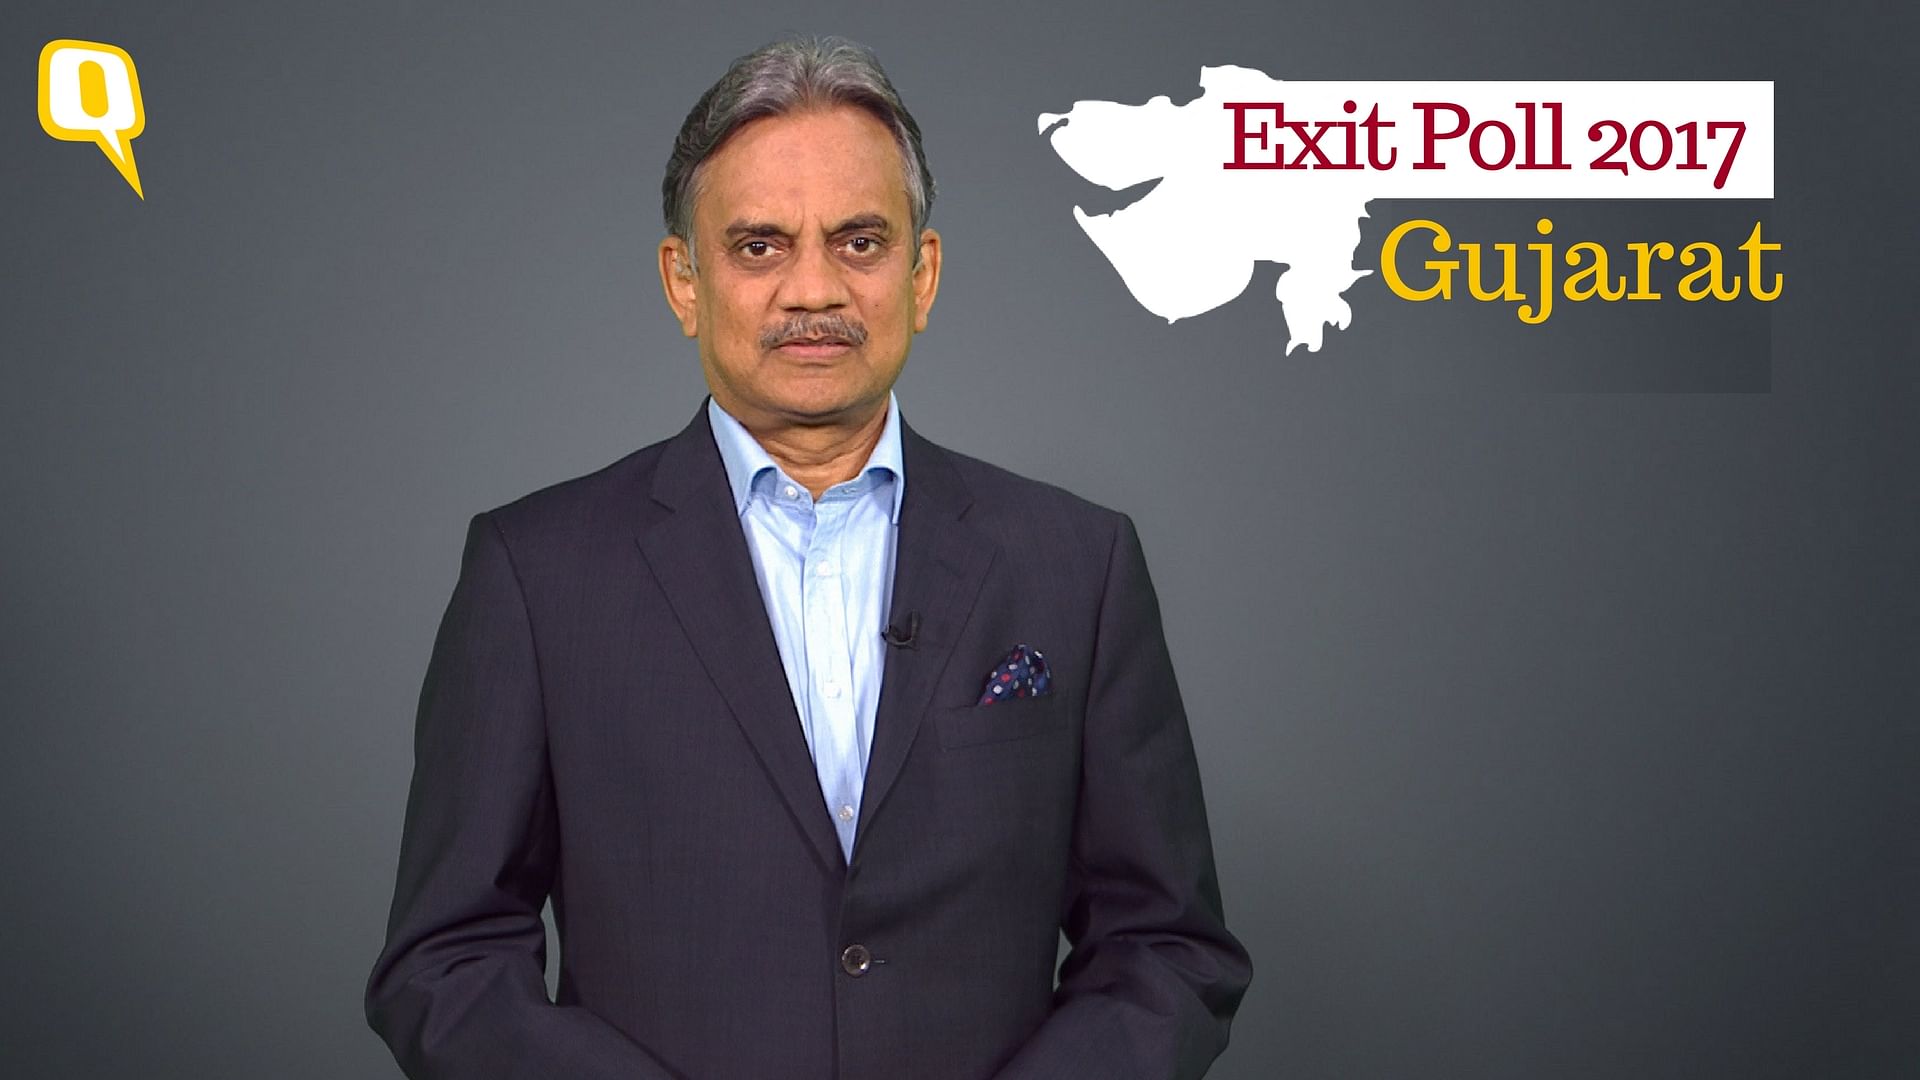 What do the exit polls tell us about Gujarat?